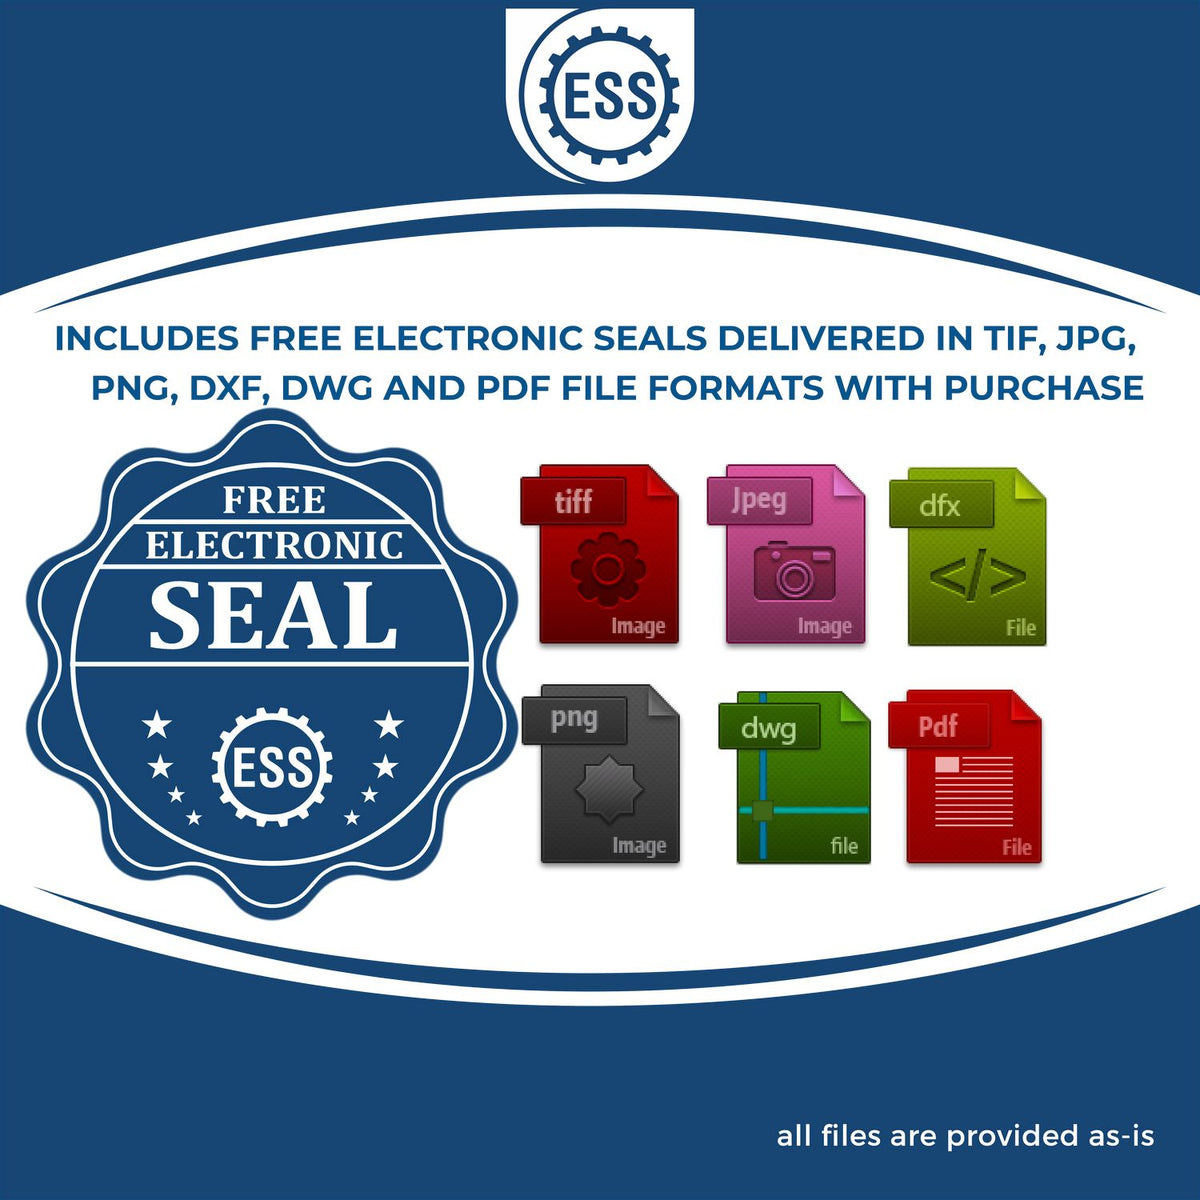 An infographic for the free electronic seal for the Hybrid Virginia Land Surveyor Seal illustrating the different file type icons such as DXF, DWG, TIF, JPG and PNG.